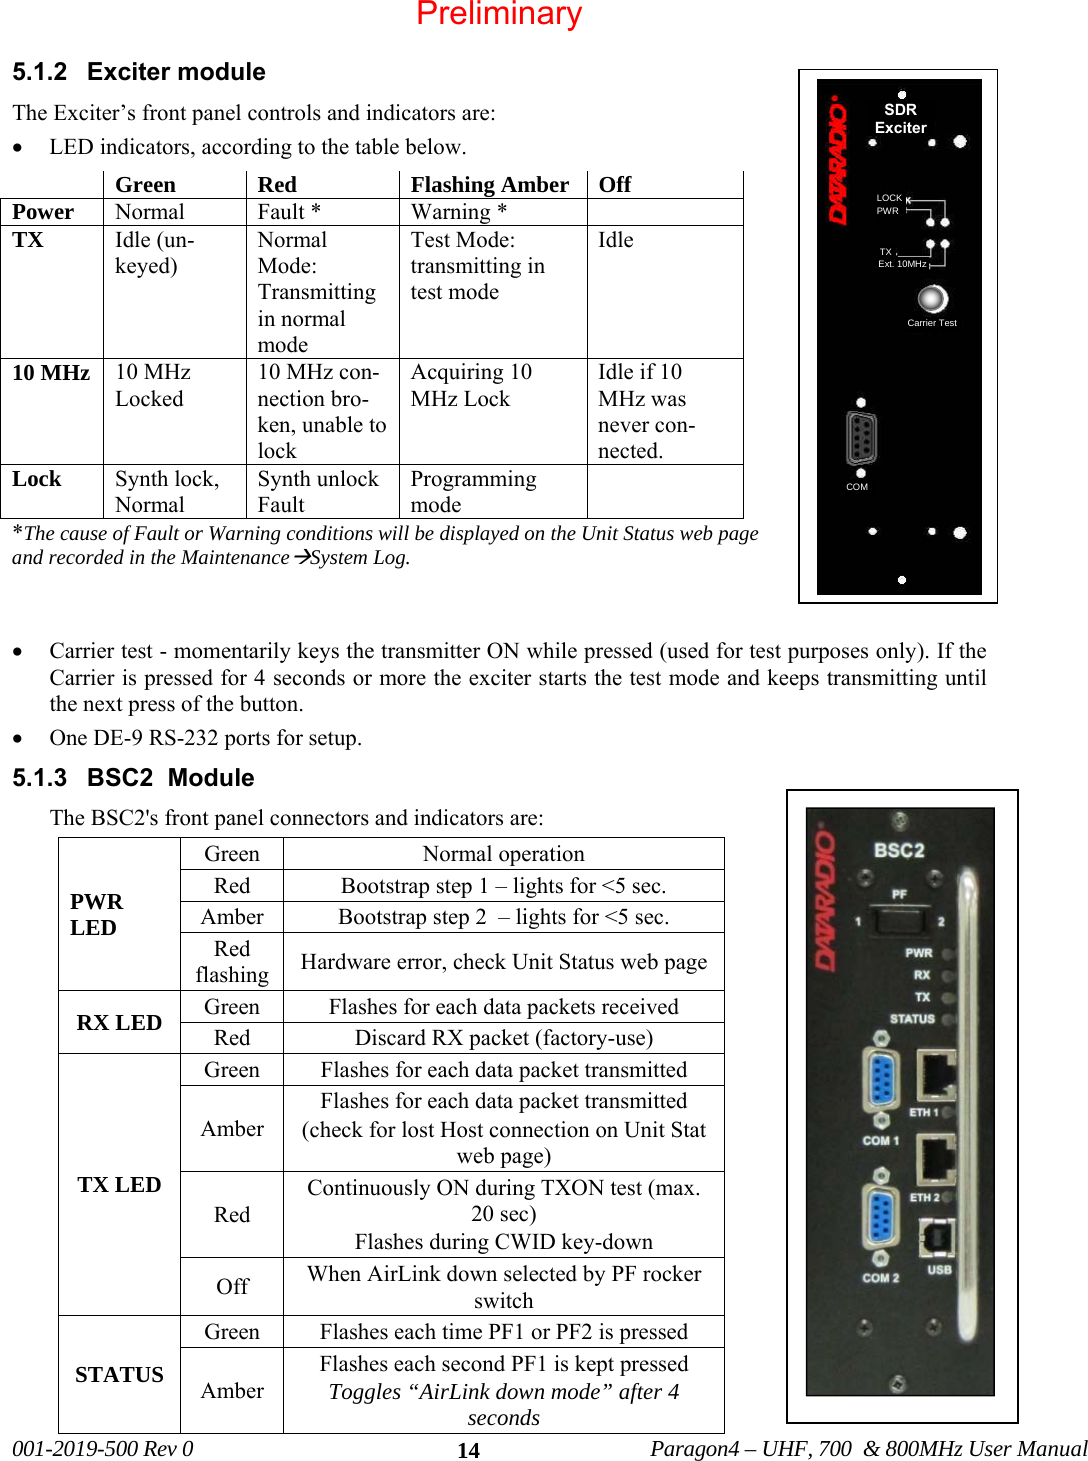   001-2019-500 Rev 0          Paragon4 – UHF, 700  &amp; 800MHz User Manual   145.1.2 Exciter module The Exciter’s front panel controls and indicators are: • LED indicators, according to the table below. *The cause of Fault or Warning conditions will be displayed on the Unit Status web page and recorded in the MaintenanceÆSystem Log.    • Carrier test - momentarily keys the transmitter ON while pressed (used for test purposes only). If the Carrier is pressed for 4 seconds or more the exciter starts the test mode and keeps transmitting until the next press of the button. • One DE-9 RS-232 ports for setup.                    5.1.3  BSC2  Module The BSC2&apos;s front panel connectors and indicators are:                 Green Red  Flashing Amber Off Power  Normal  Fault *  Warning *   TX  Idle (un-keyed) Normal Mode: Transmitting in normal mode Test Mode:  transmitting in test mode Idle 10 MHz  10 MHz Locked 10 MHz con-nection bro-ken, unable to lock Acquiring 10 MHz Lock Idle if 10 MHz was never con-nected. Lock  Synth lock, Normal Synth unlock Fault  Programming mode  PWR LED Green   Normal operation Red   Bootstrap step 1 – lights for &lt;5 sec. Amber  Bootstrap step 2  – lights for &lt;5 sec. Red flashing  Hardware error, check Unit Status web page RX LED  Green   Flashes for each data packets received Red       Discard RX packet (factory-use) TX LED Green   Flashes for each data packet transmitted Amber Flashes for each data packet transmitted  (check for lost Host connection on Unit Stat web page) Red Continuously ON during TXON test (max. 20 sec) Flashes during CWID key-down Off   When AirLink down selected by PF rocker switch STATUS Green   Flashes each time PF1 or PF2 is pressed Amber Flashes each second PF1 is kept pressed  Toggles “AirLink down mode” after 4 seconds LOCKPWR TXExt. 10MHzCOM Carrier Test SDRExciterPreliminary